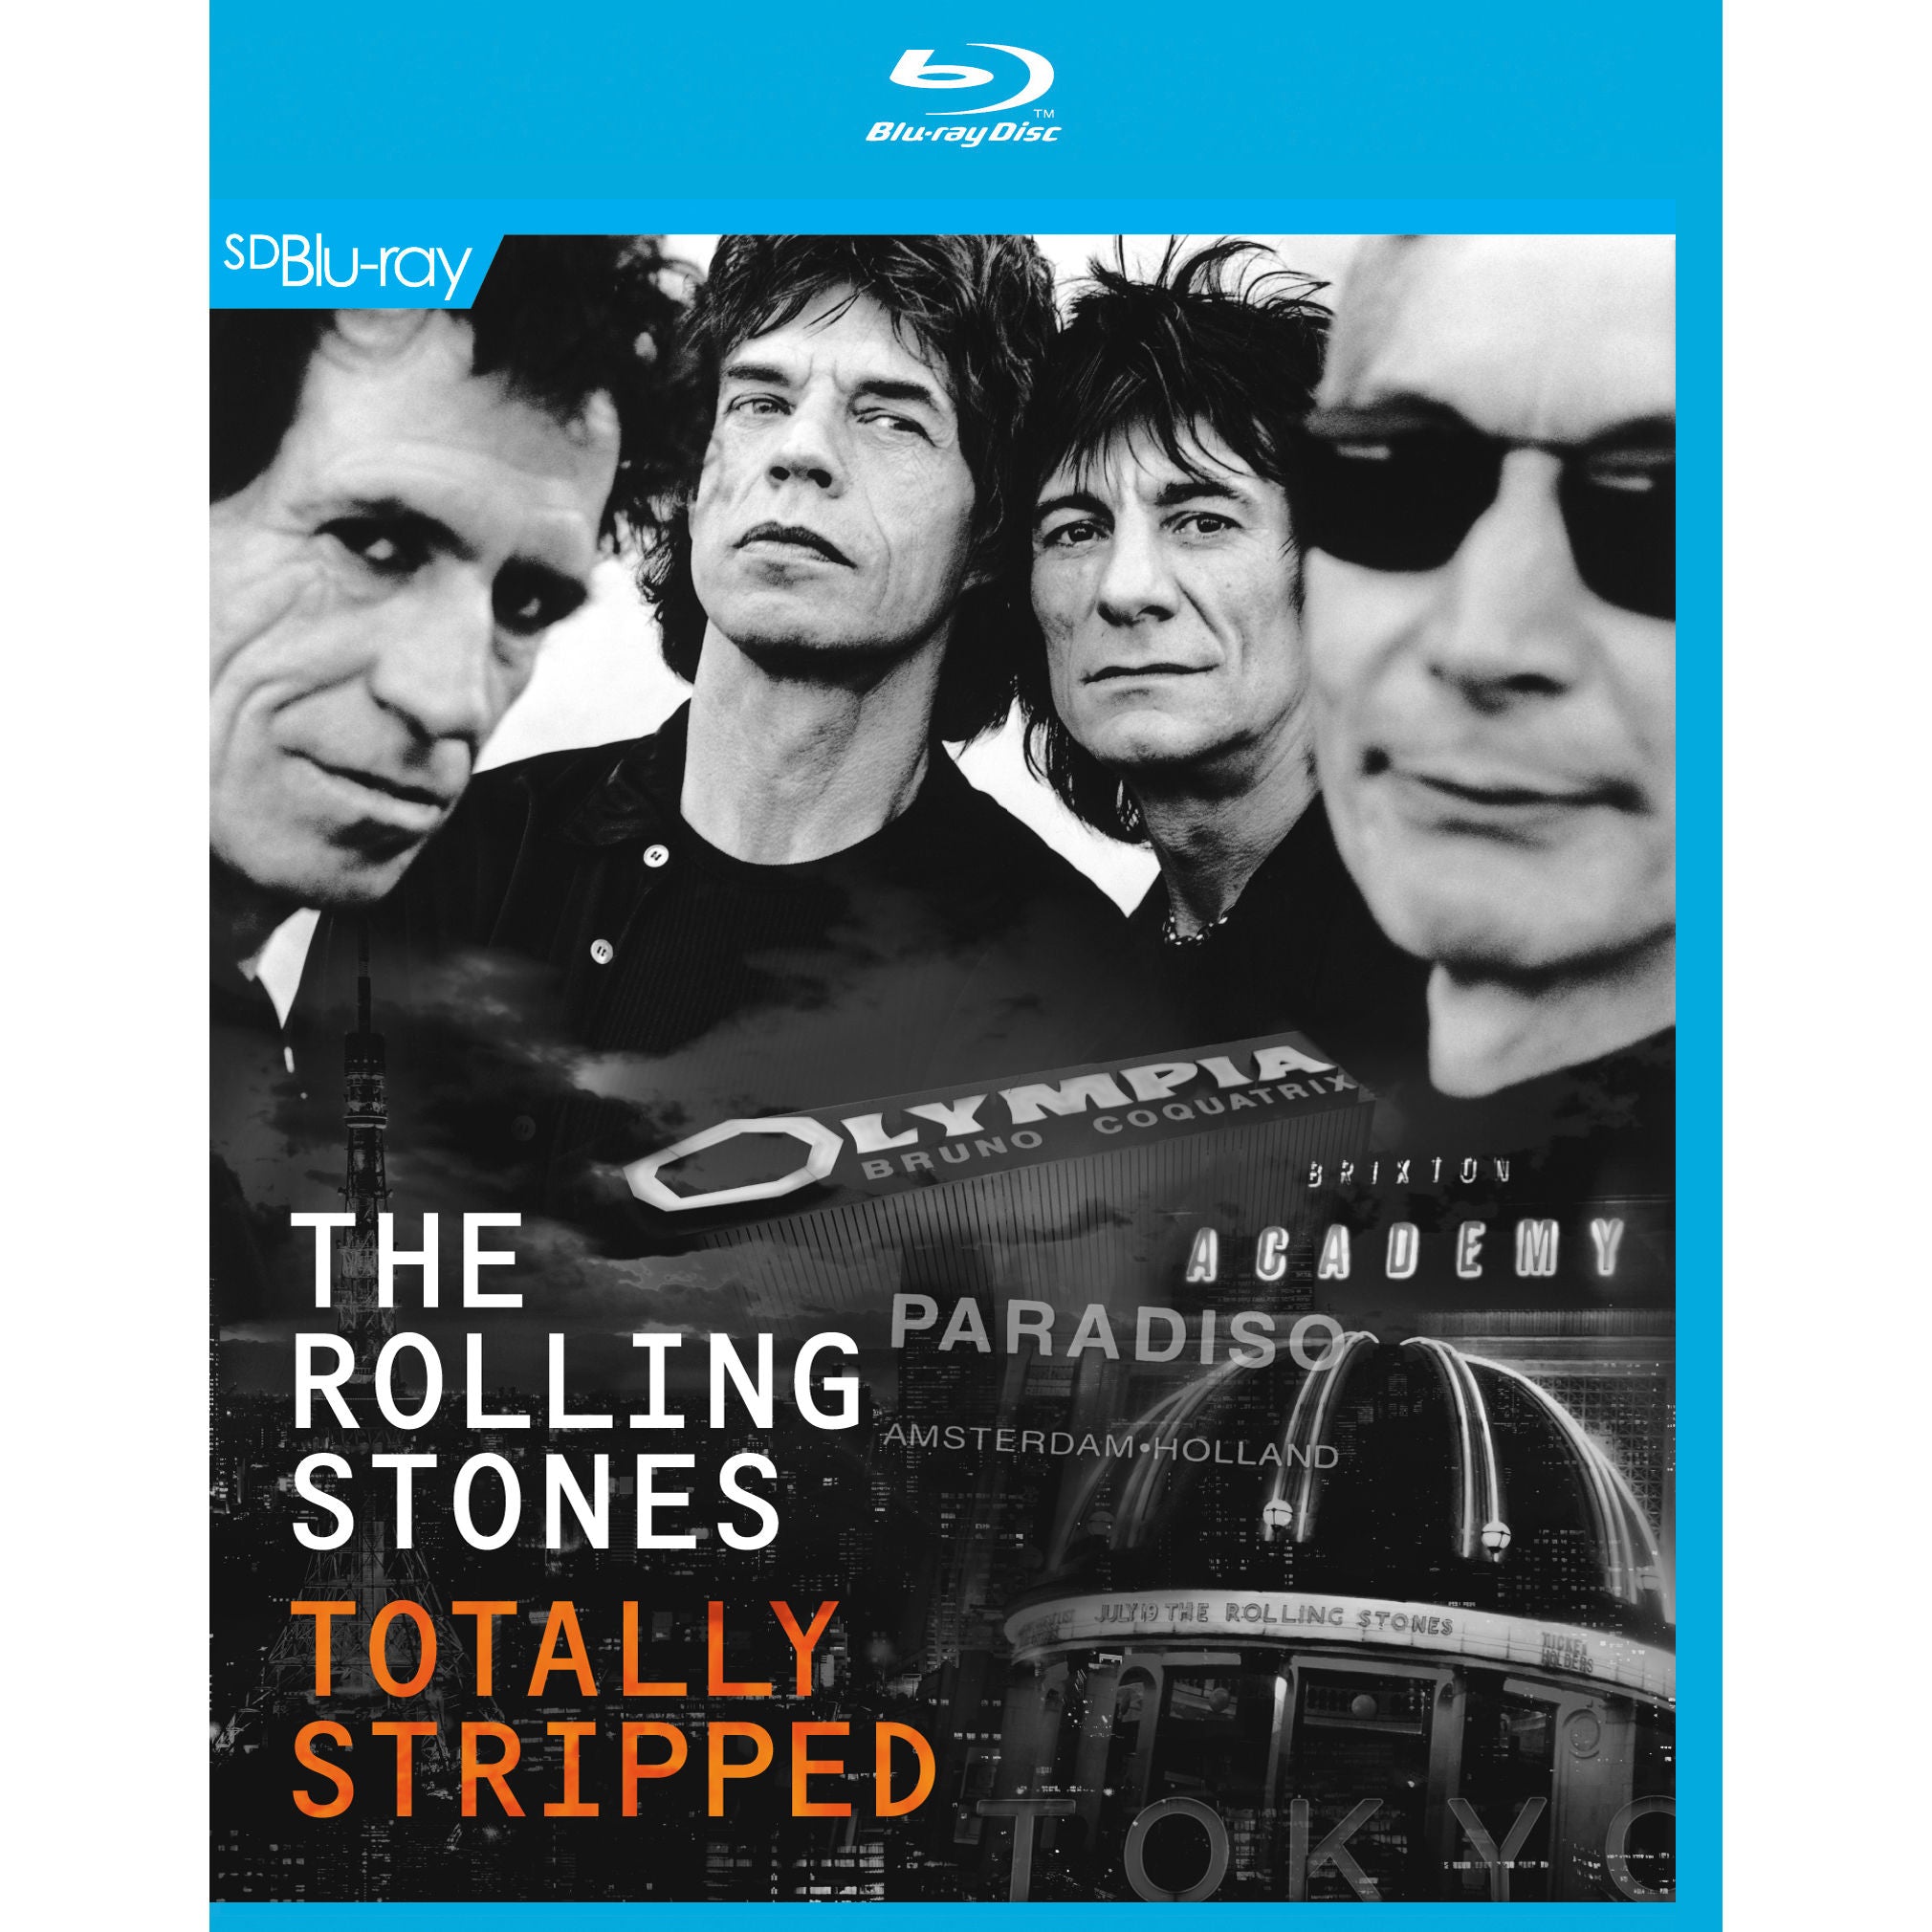 The Rolling Stones - Totally Stripped Blu-Ray